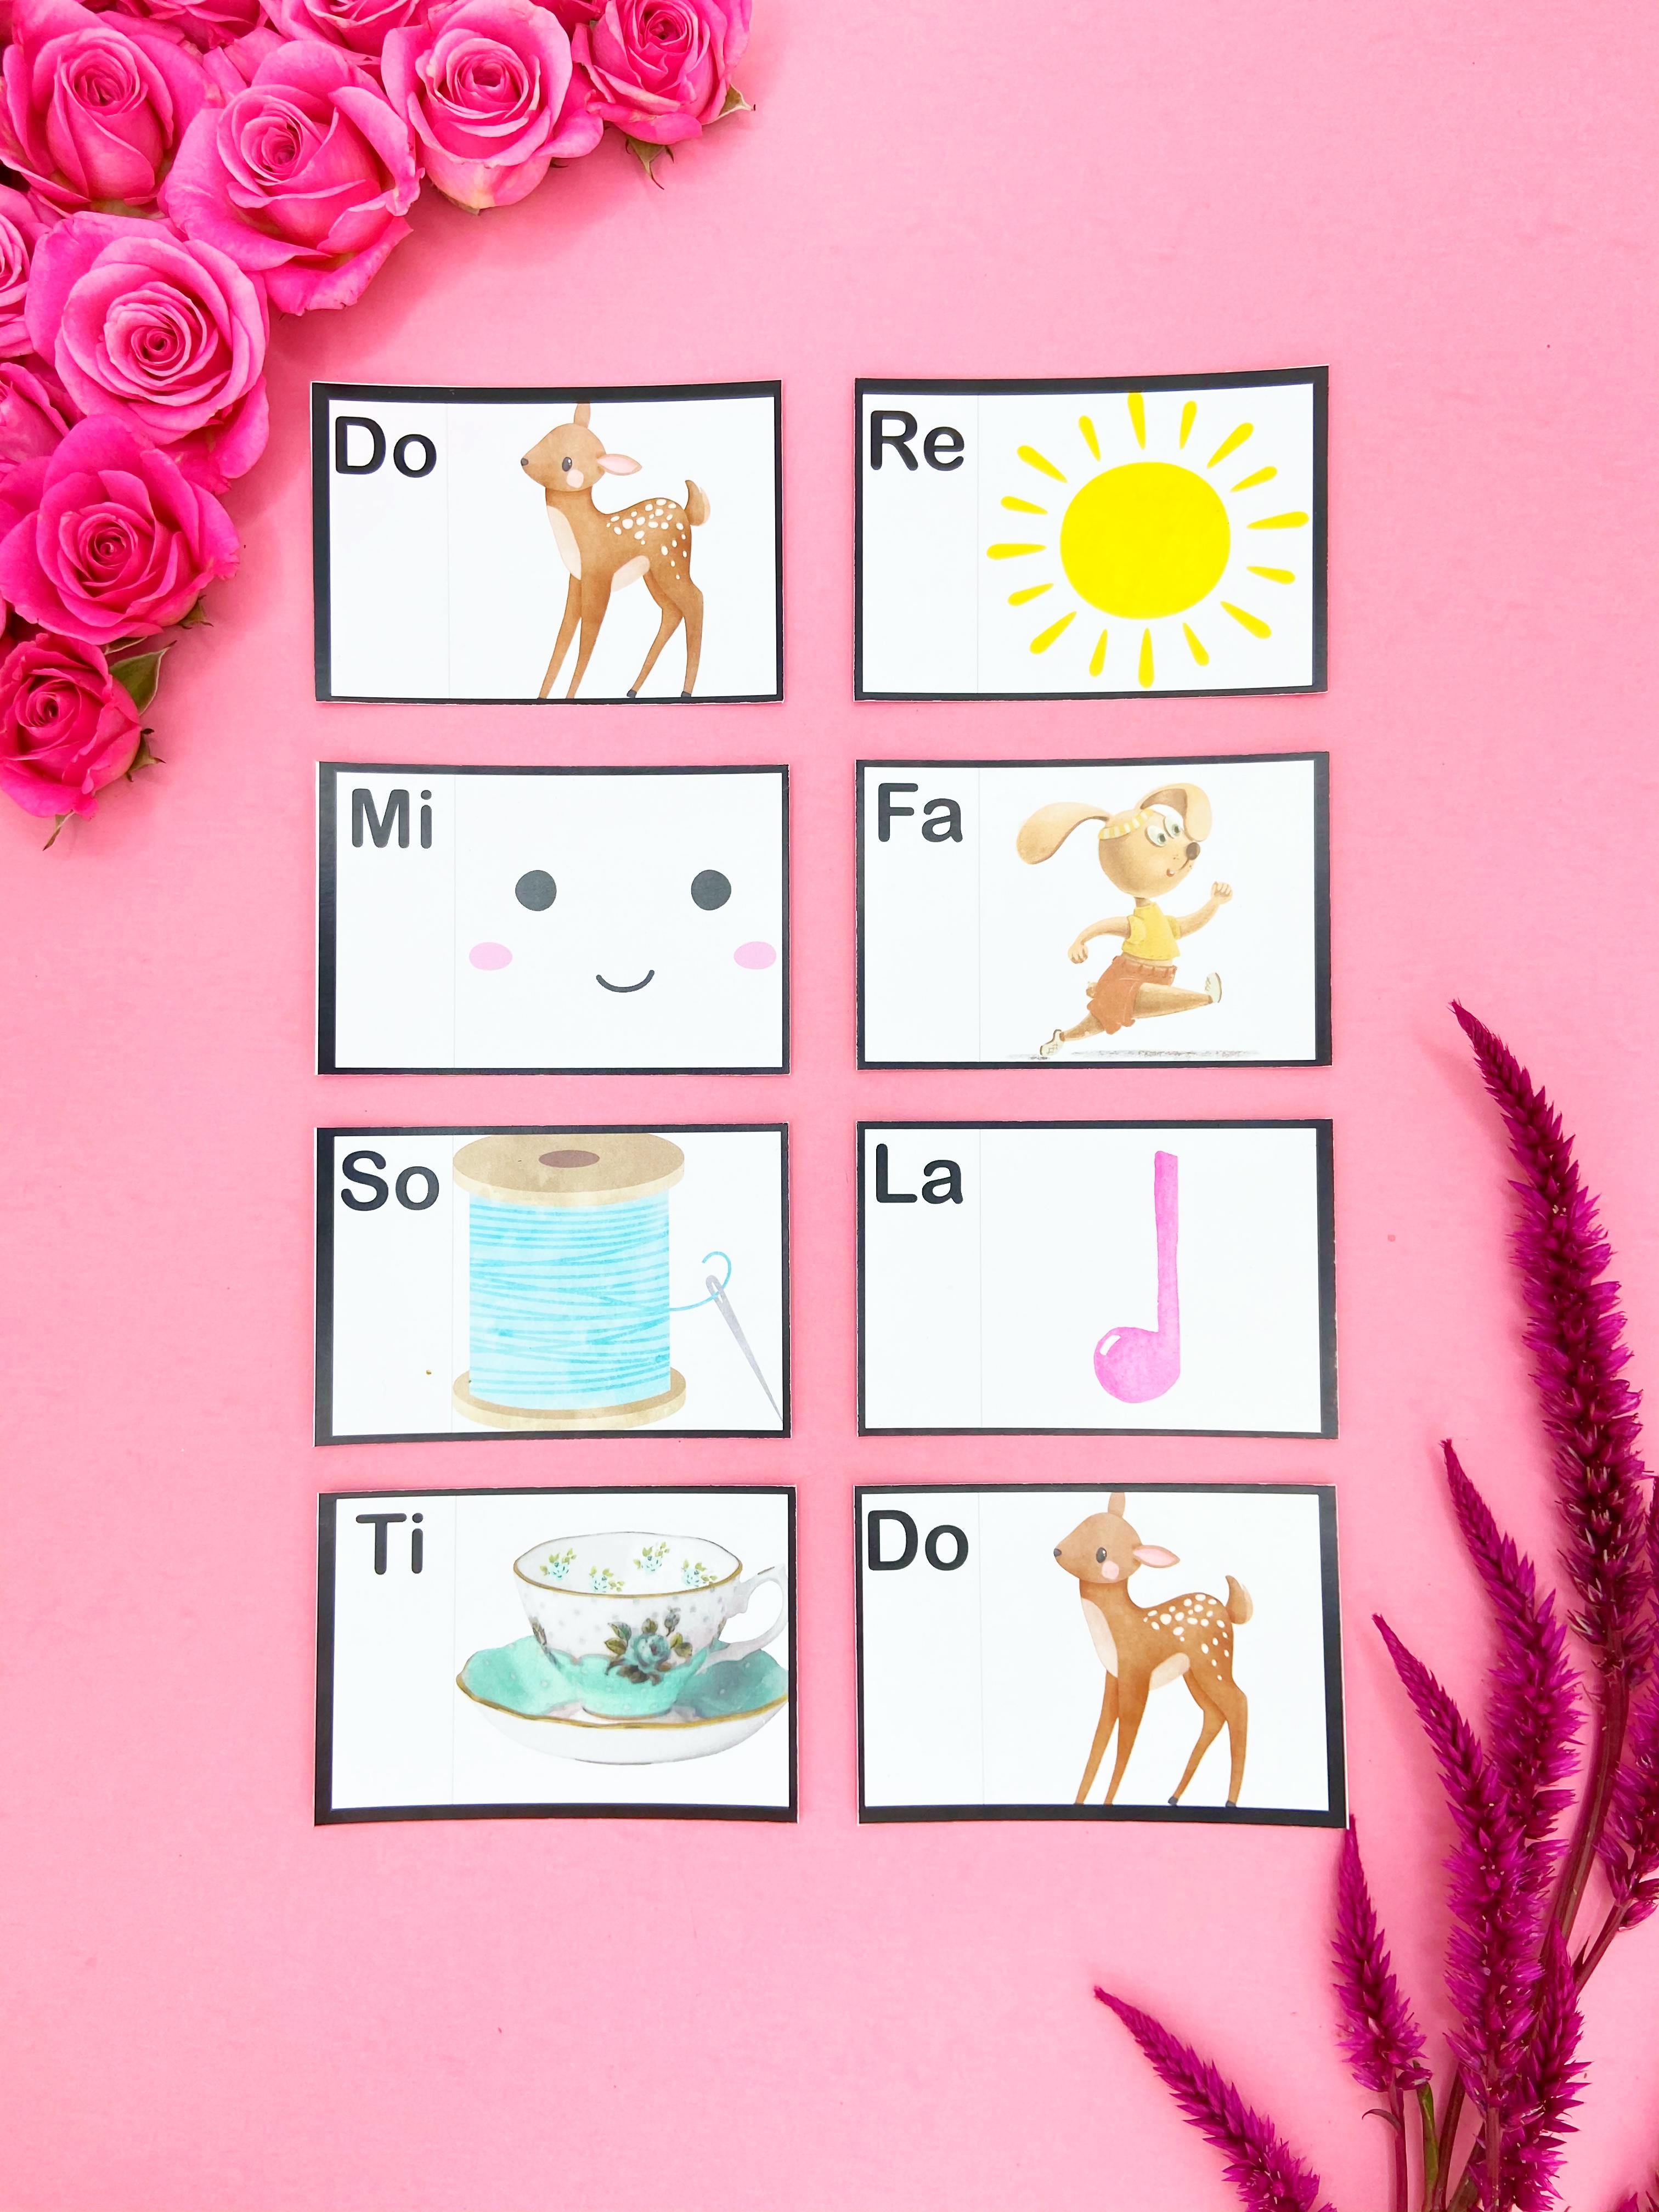 The Sound of Music free printable flashcards